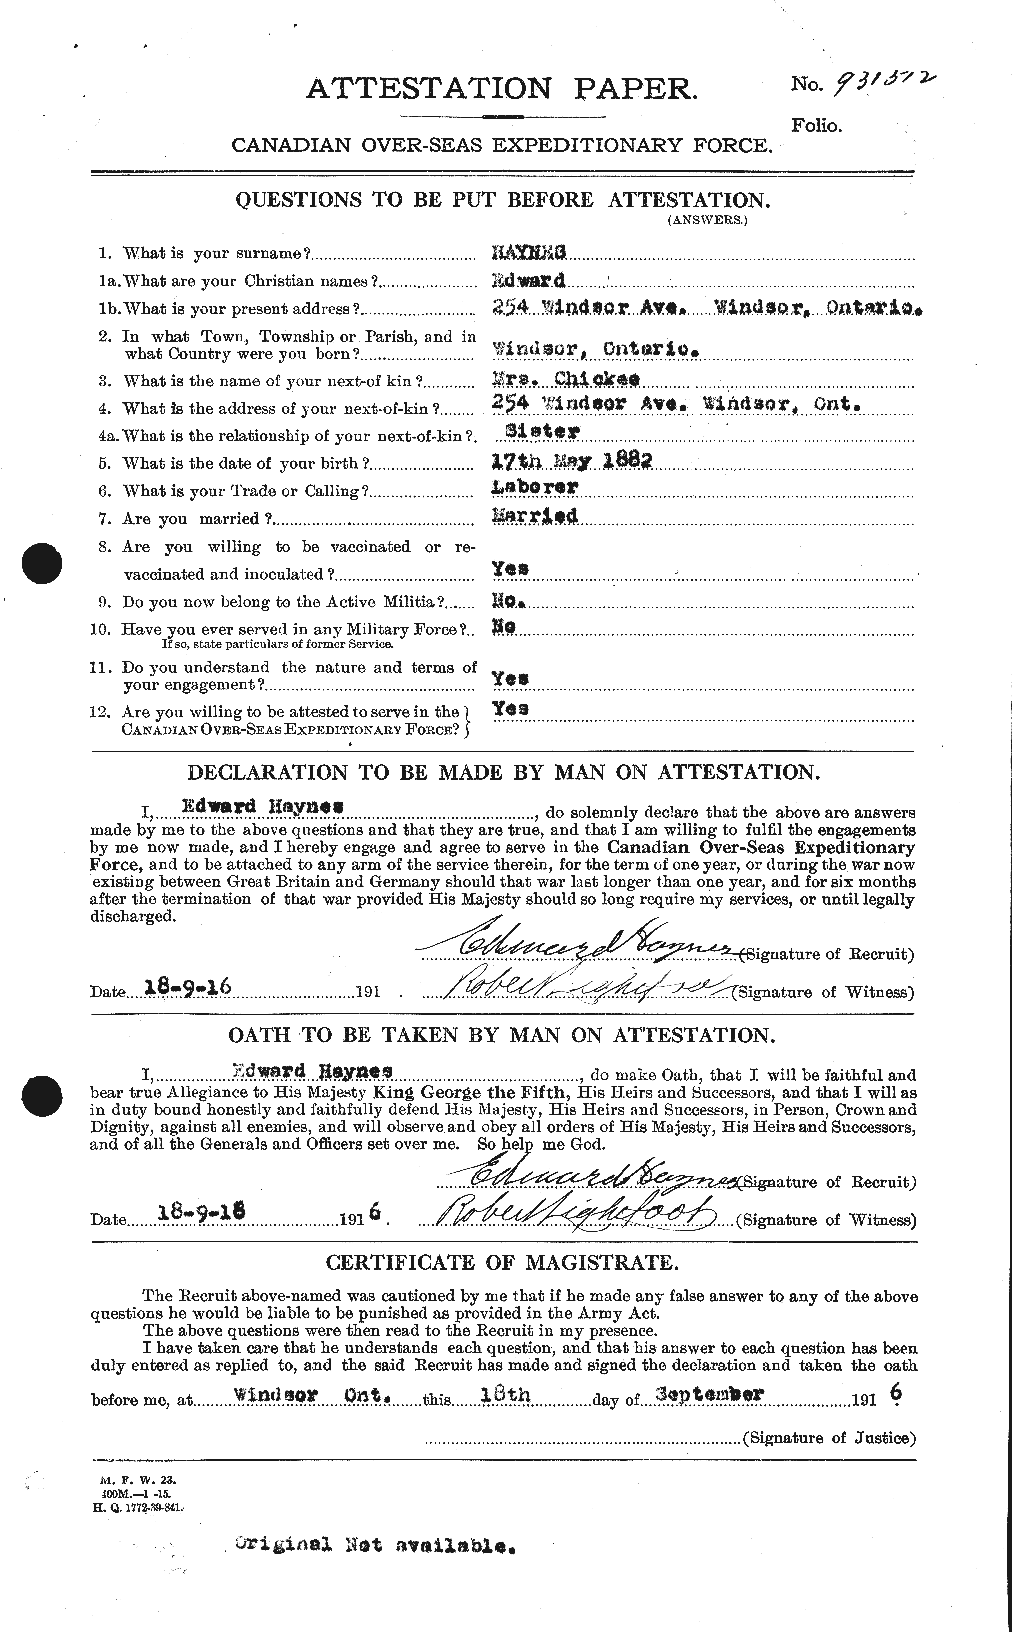 Personnel Records of the First World War - CEF 384341a